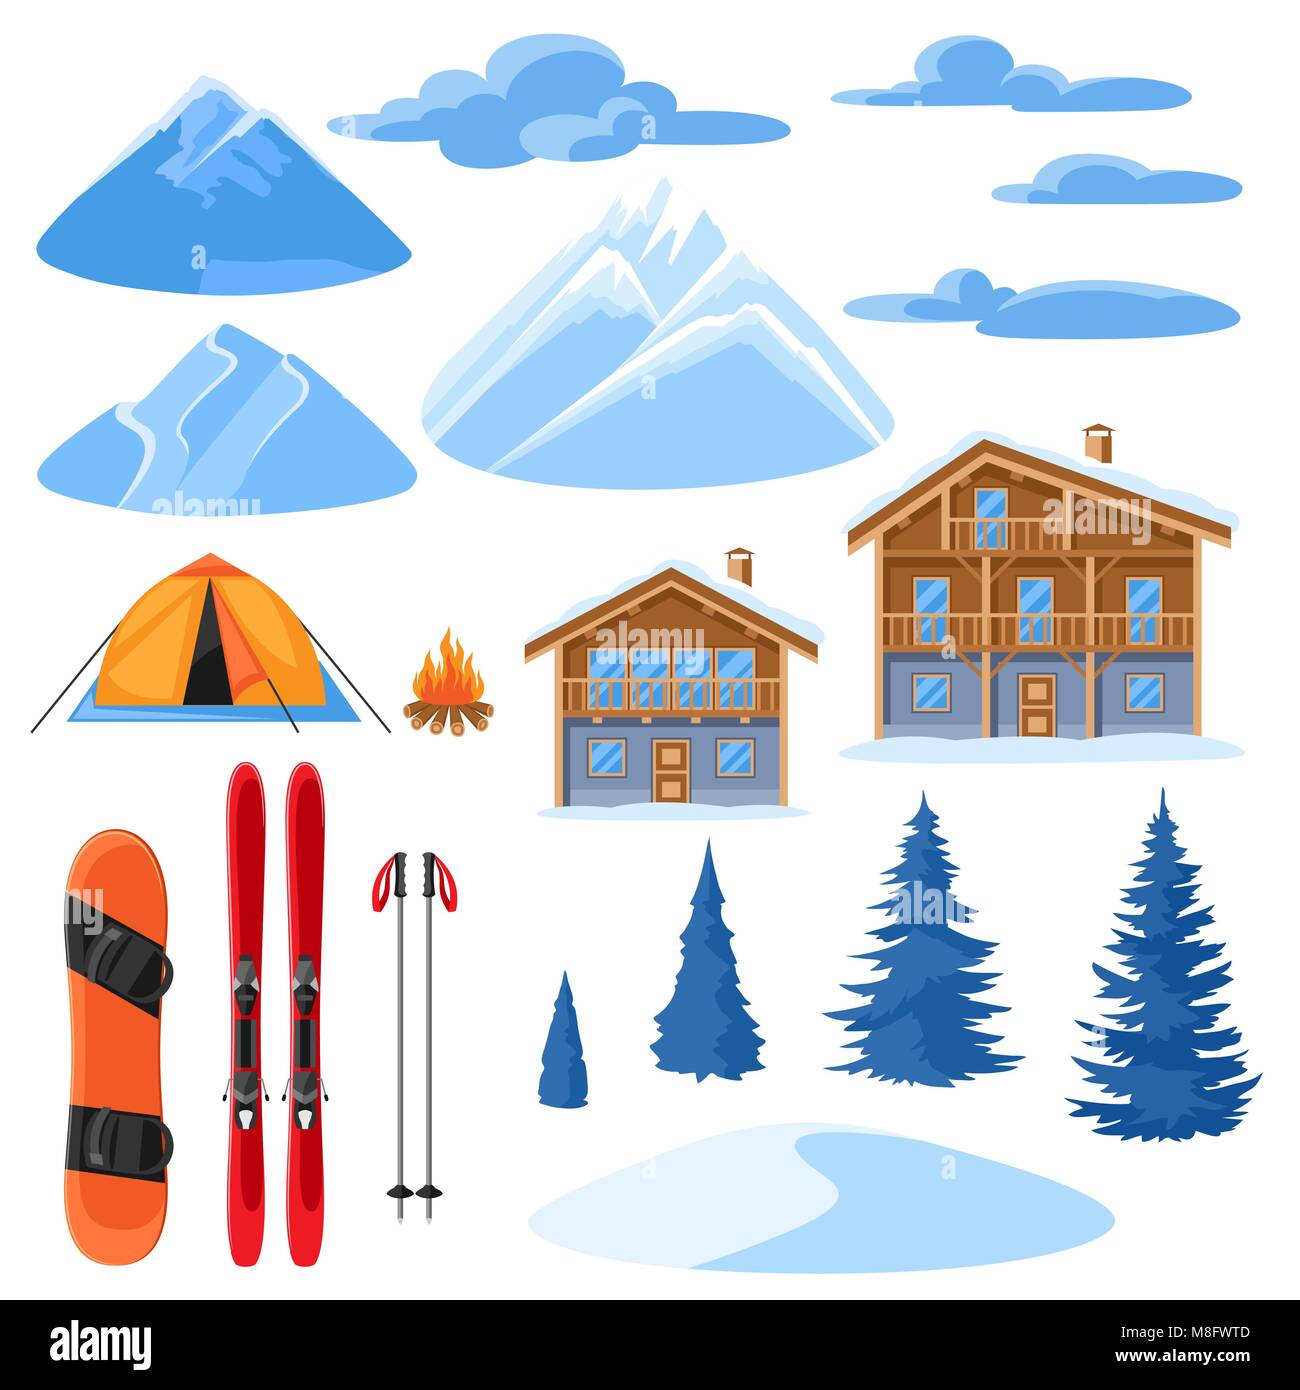 Winter set for design. Alpine chalet houses, snowboard, ski, snowy mountains and fir trees Stock Vector